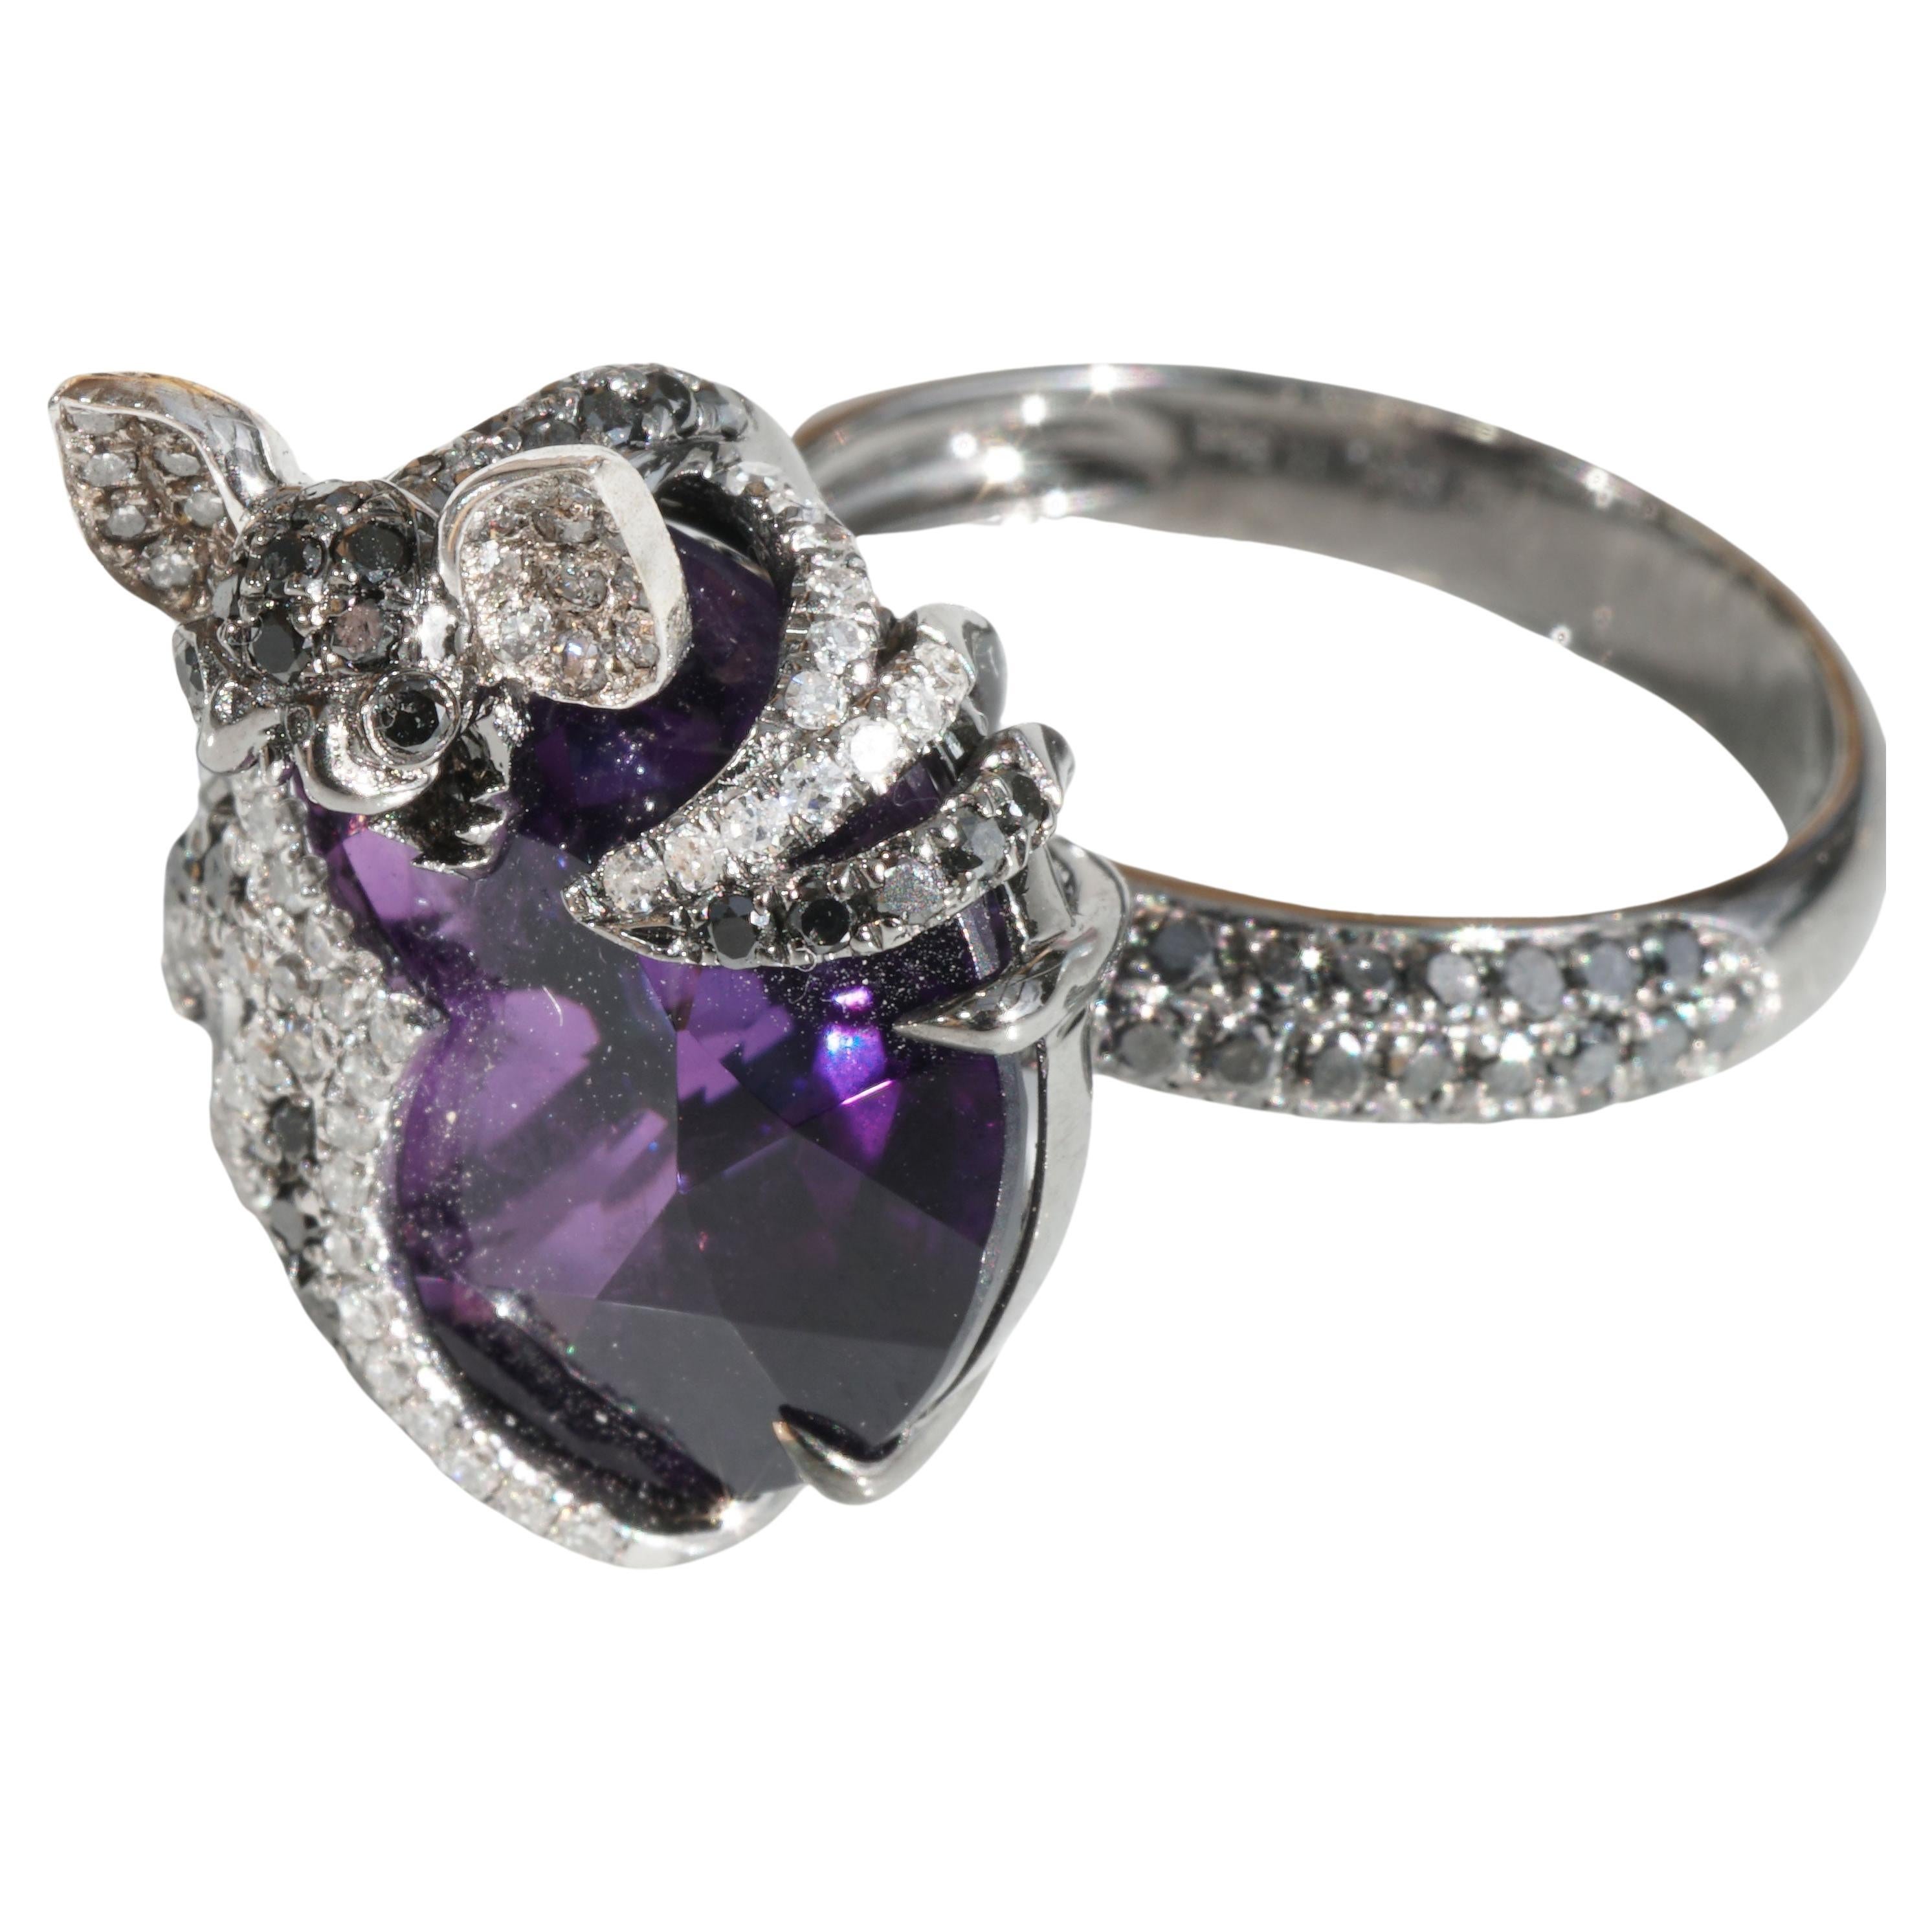 Designer ring with creepy bat shown with open mouth and pointed little teeth and wing-like overthrows, cool motif, great realization, matching a very fine Brazilian amethyst ca. 11.54 ct and black diamonds total ca. 0.61 ct, as contrast white